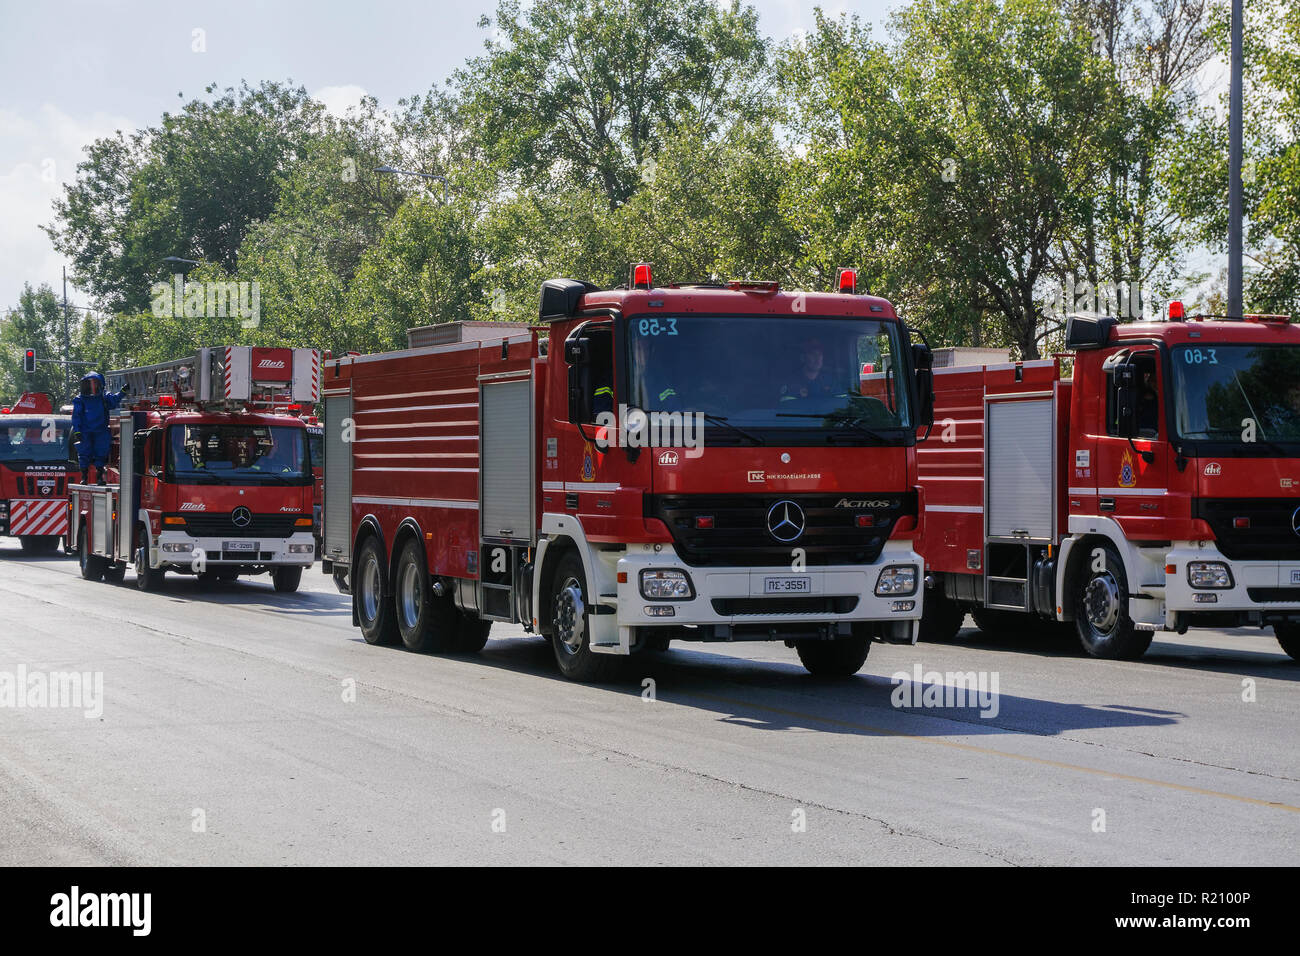 Greek Fire Service trucks during Oxi Day parade in Thessaloniki, Greece. Hellenic Fire Brigade vehicles with Greek firefighters in uniform. Stock Photo